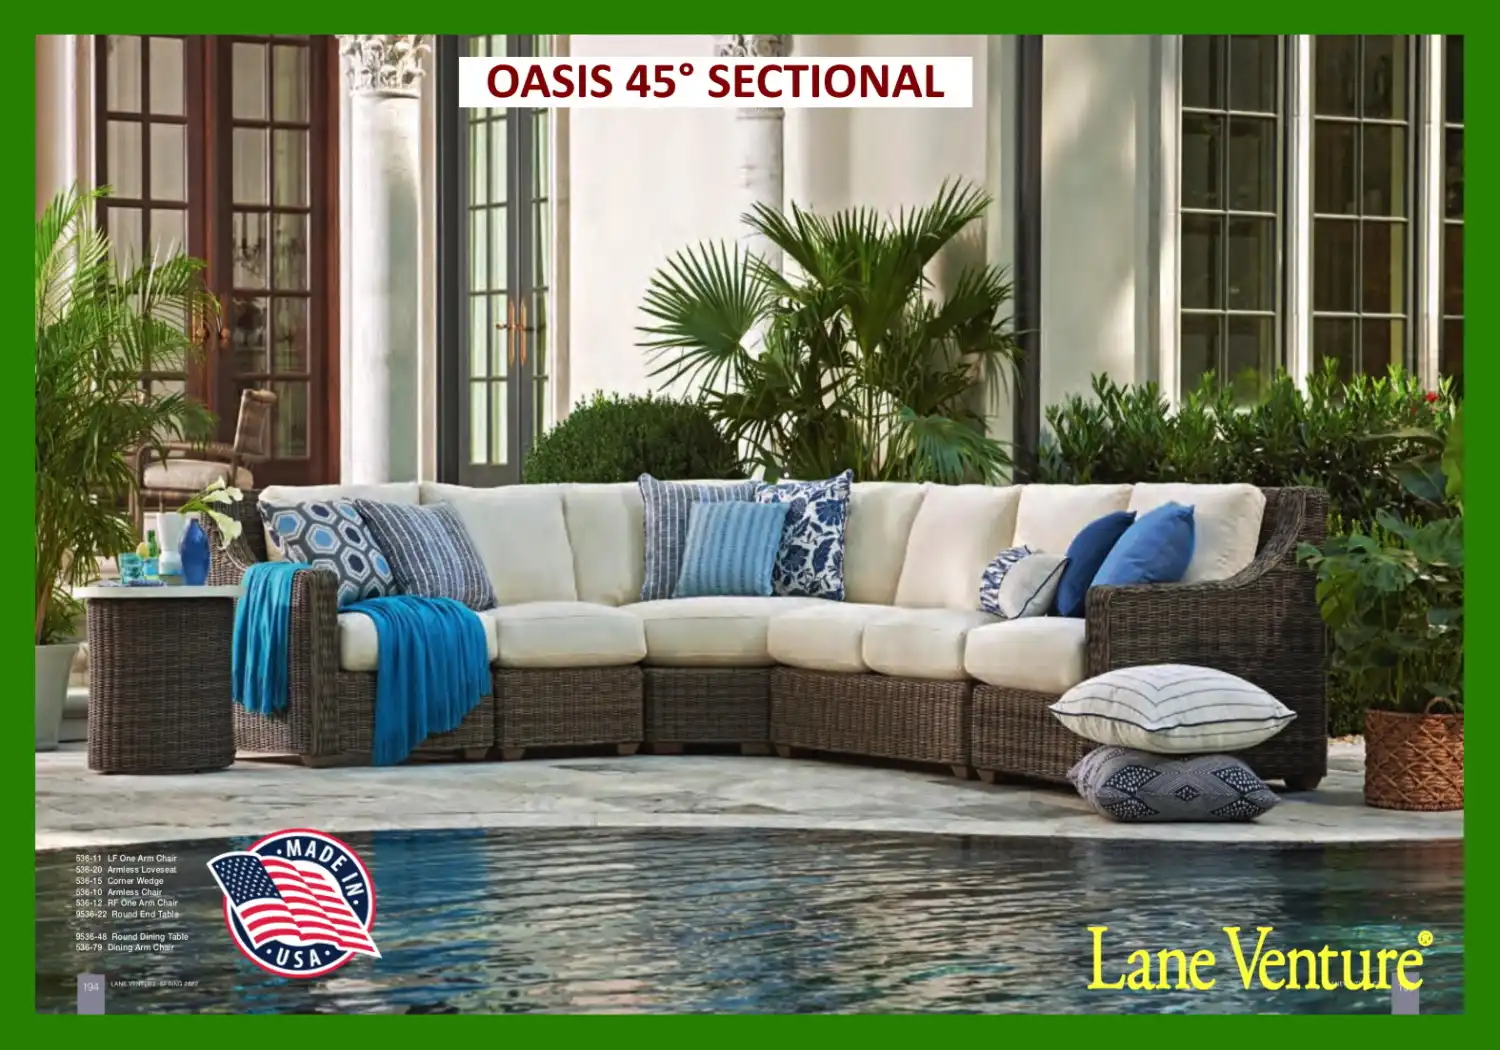 OASIS 45° SECTIONAL